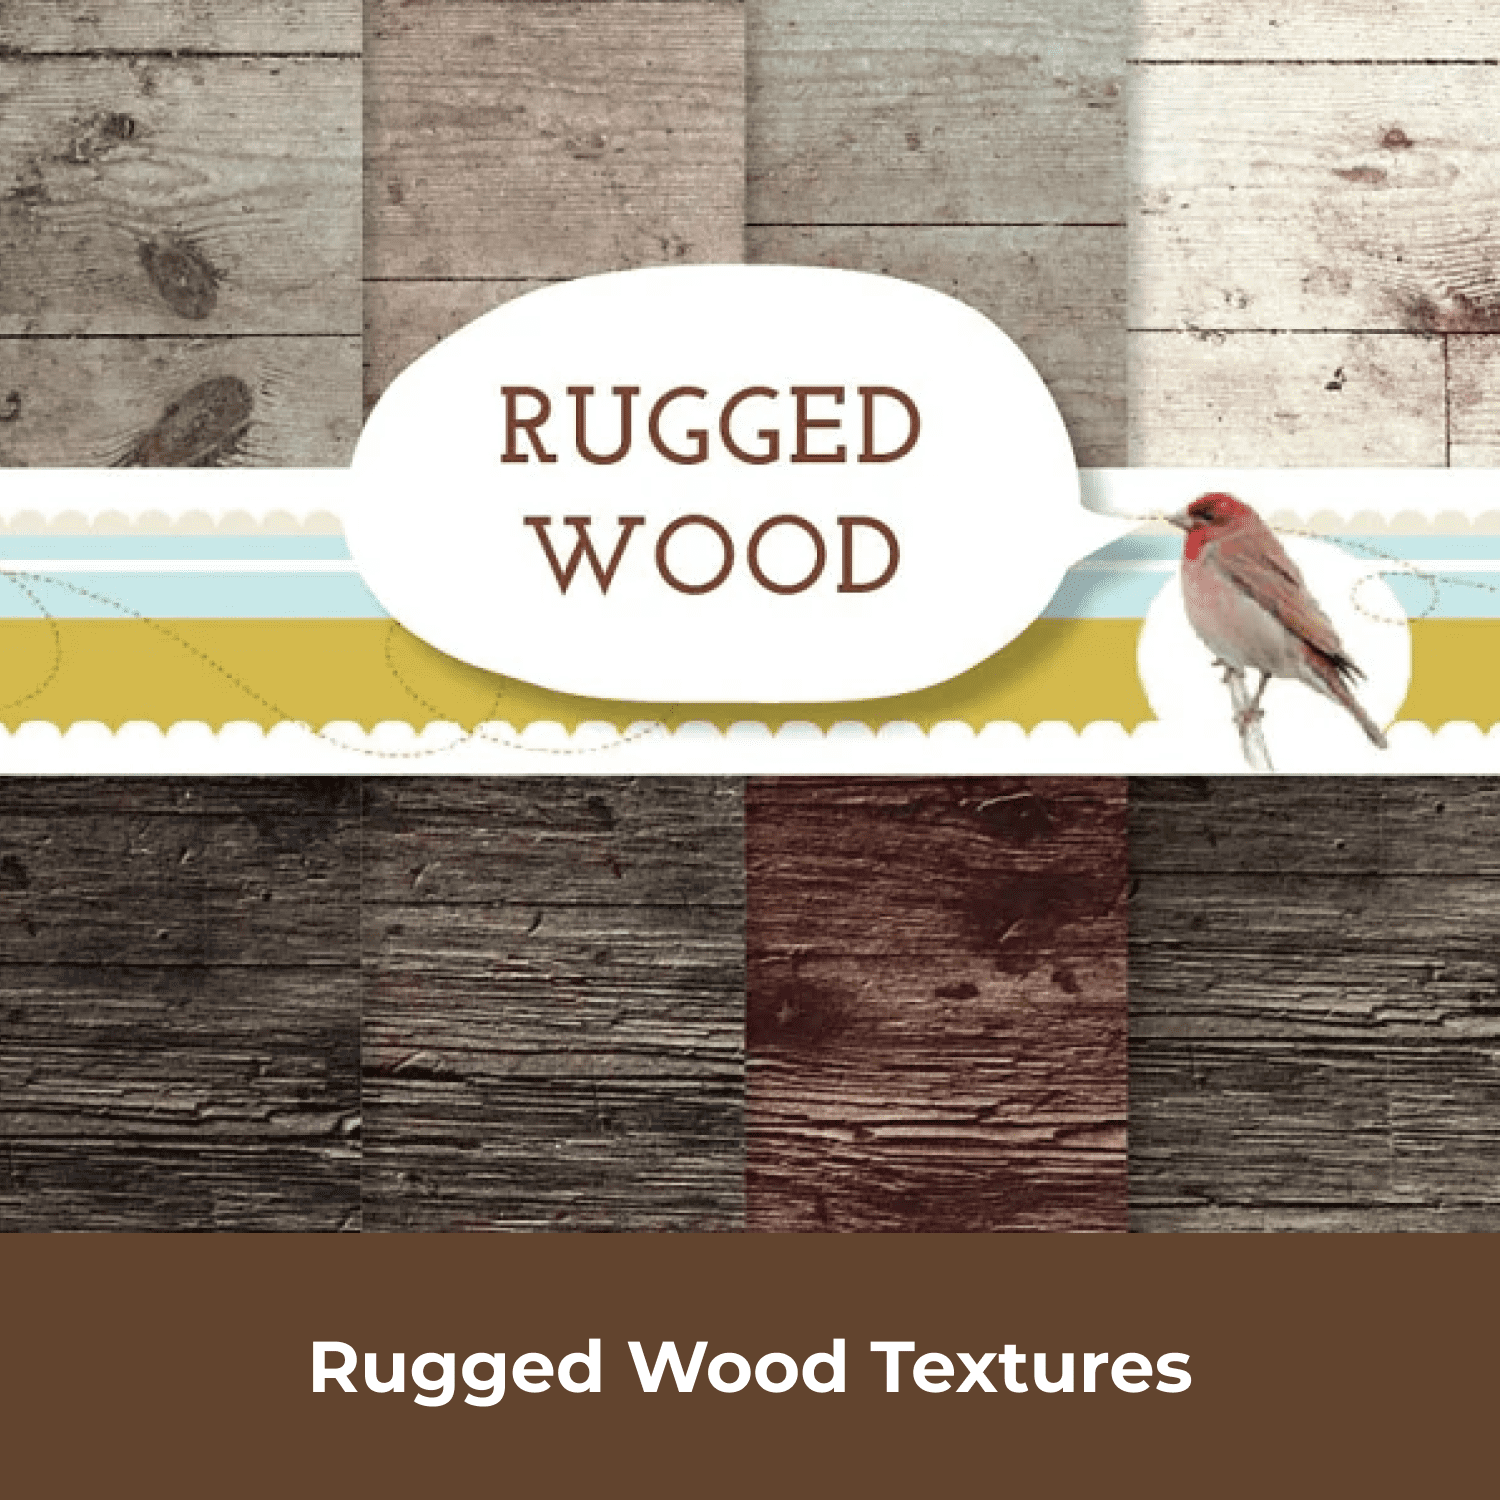 Rugged Wood Textures.